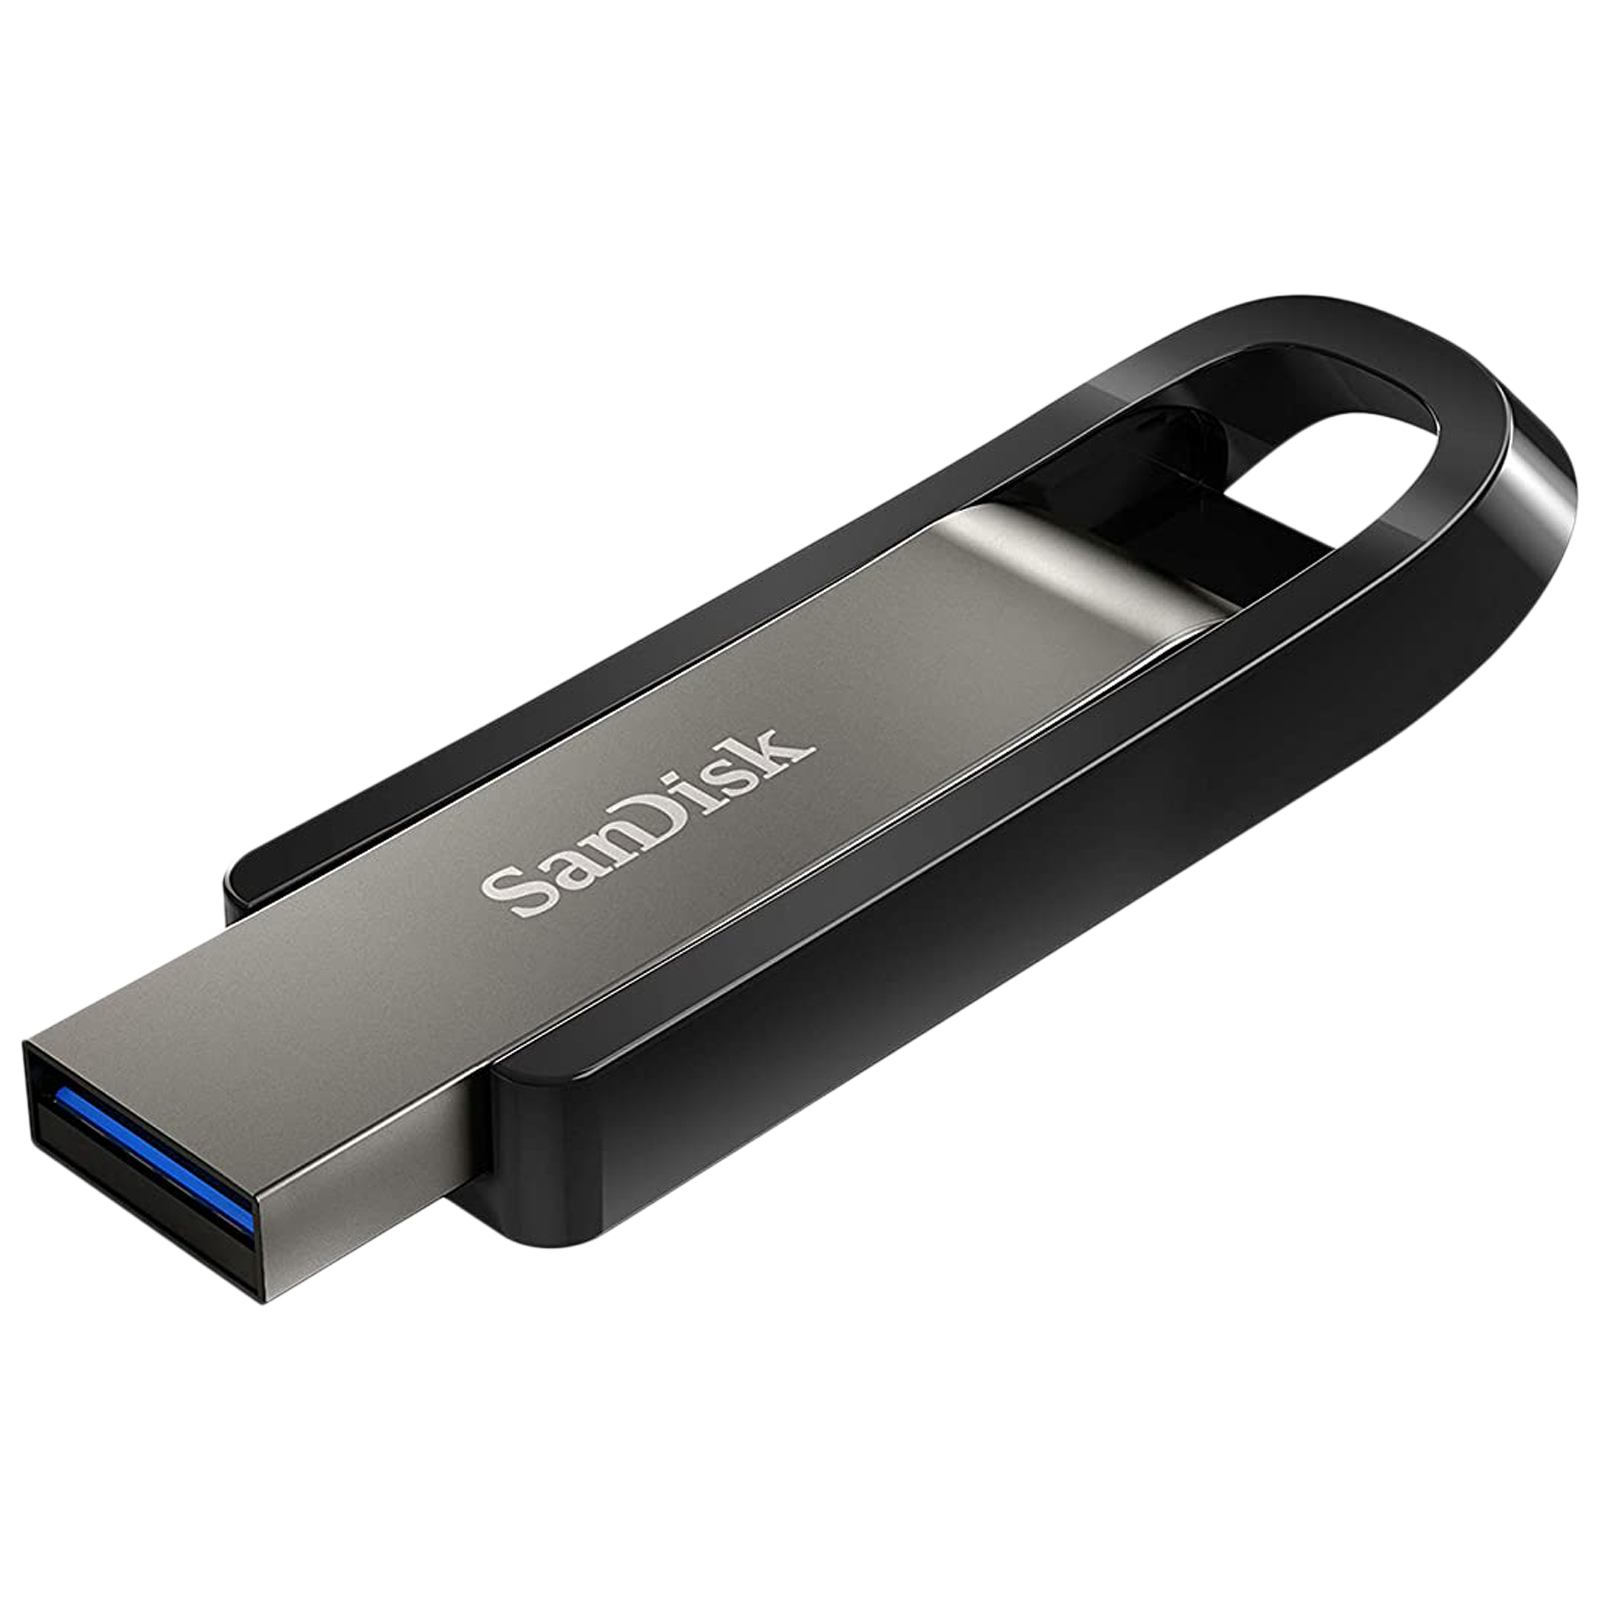 Buy SanDisk USB Extreme 64GB USB 3.2 Flash Drive (400MB/s Speed, SDCZ810-064G-G46, Silver) Online - Croma